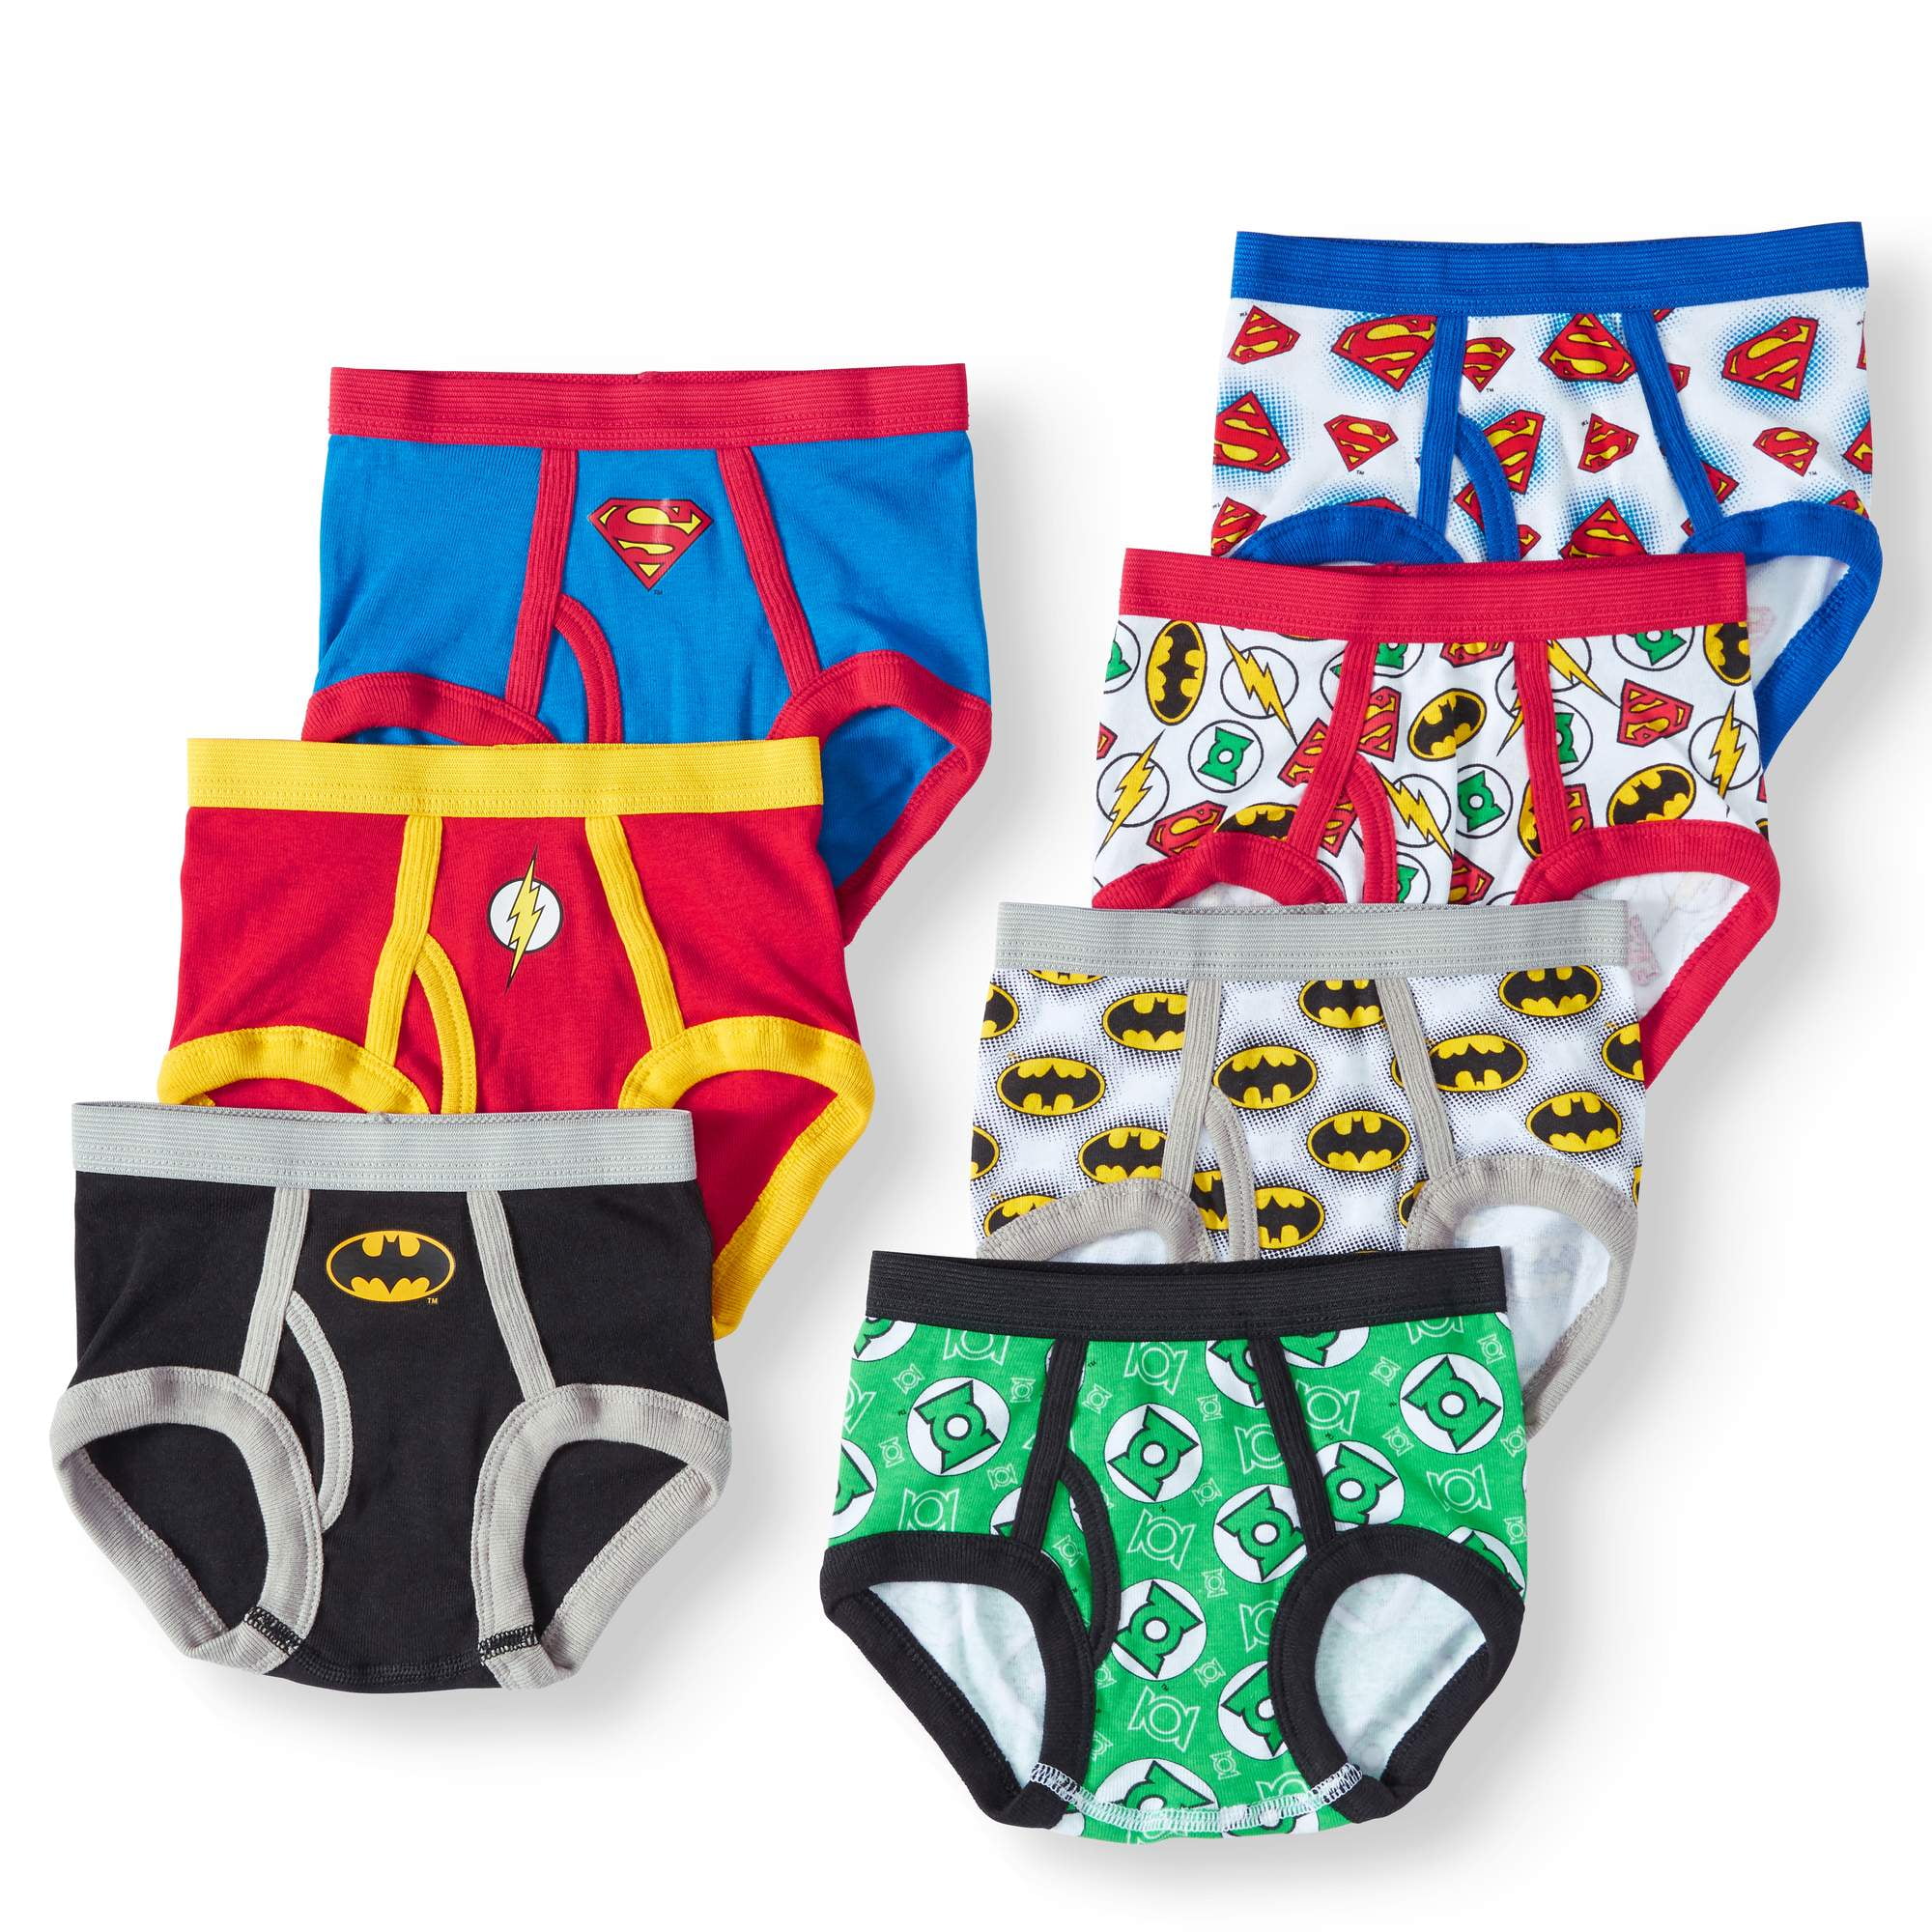 justice league baby clothes